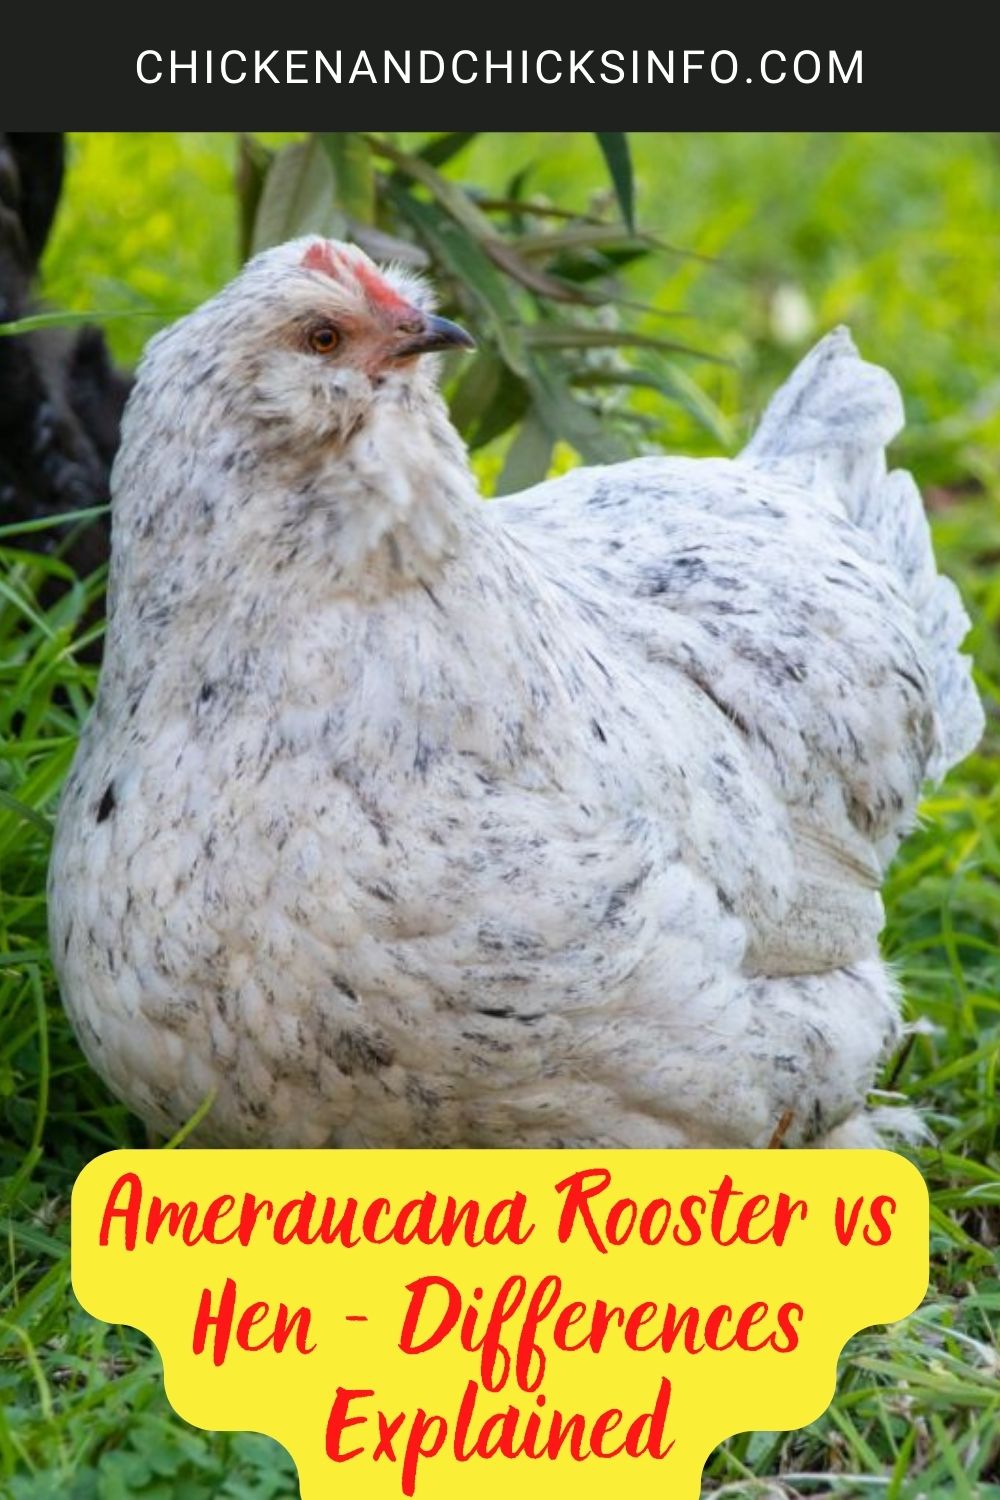 Ameraucana Rooster vs Hen - Differences Explained poster.
